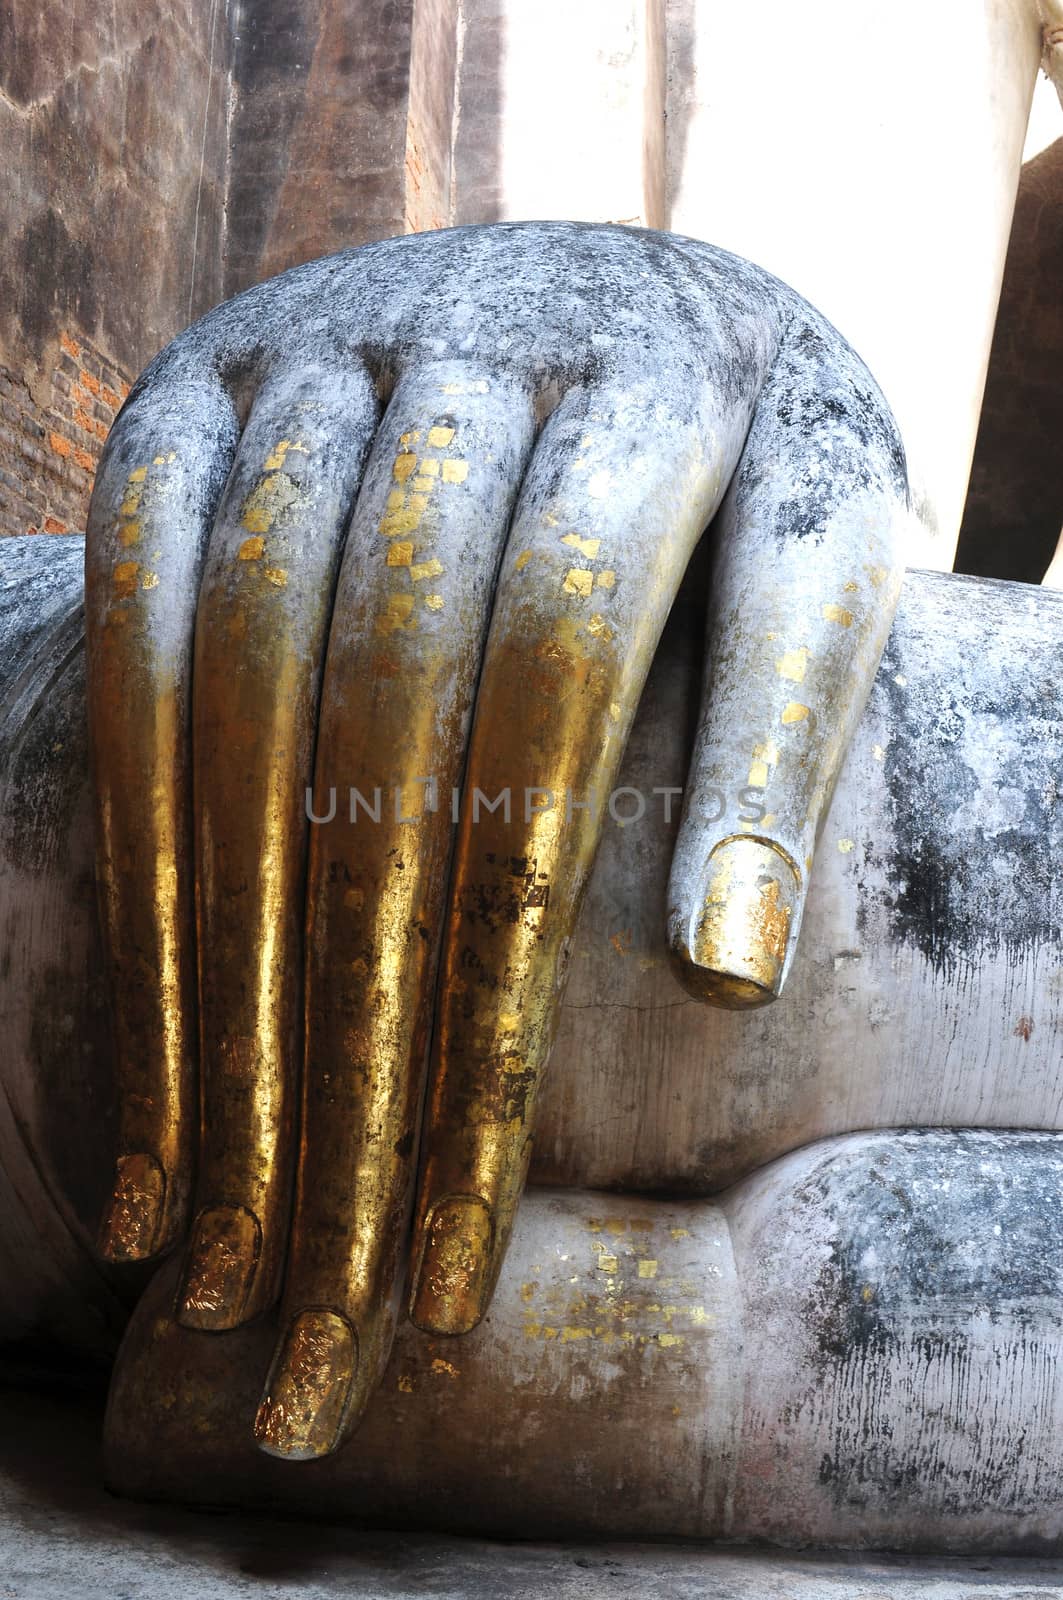 Statue of a giant Buddha's hand in the Historical Park of Sukhothai, Thailand